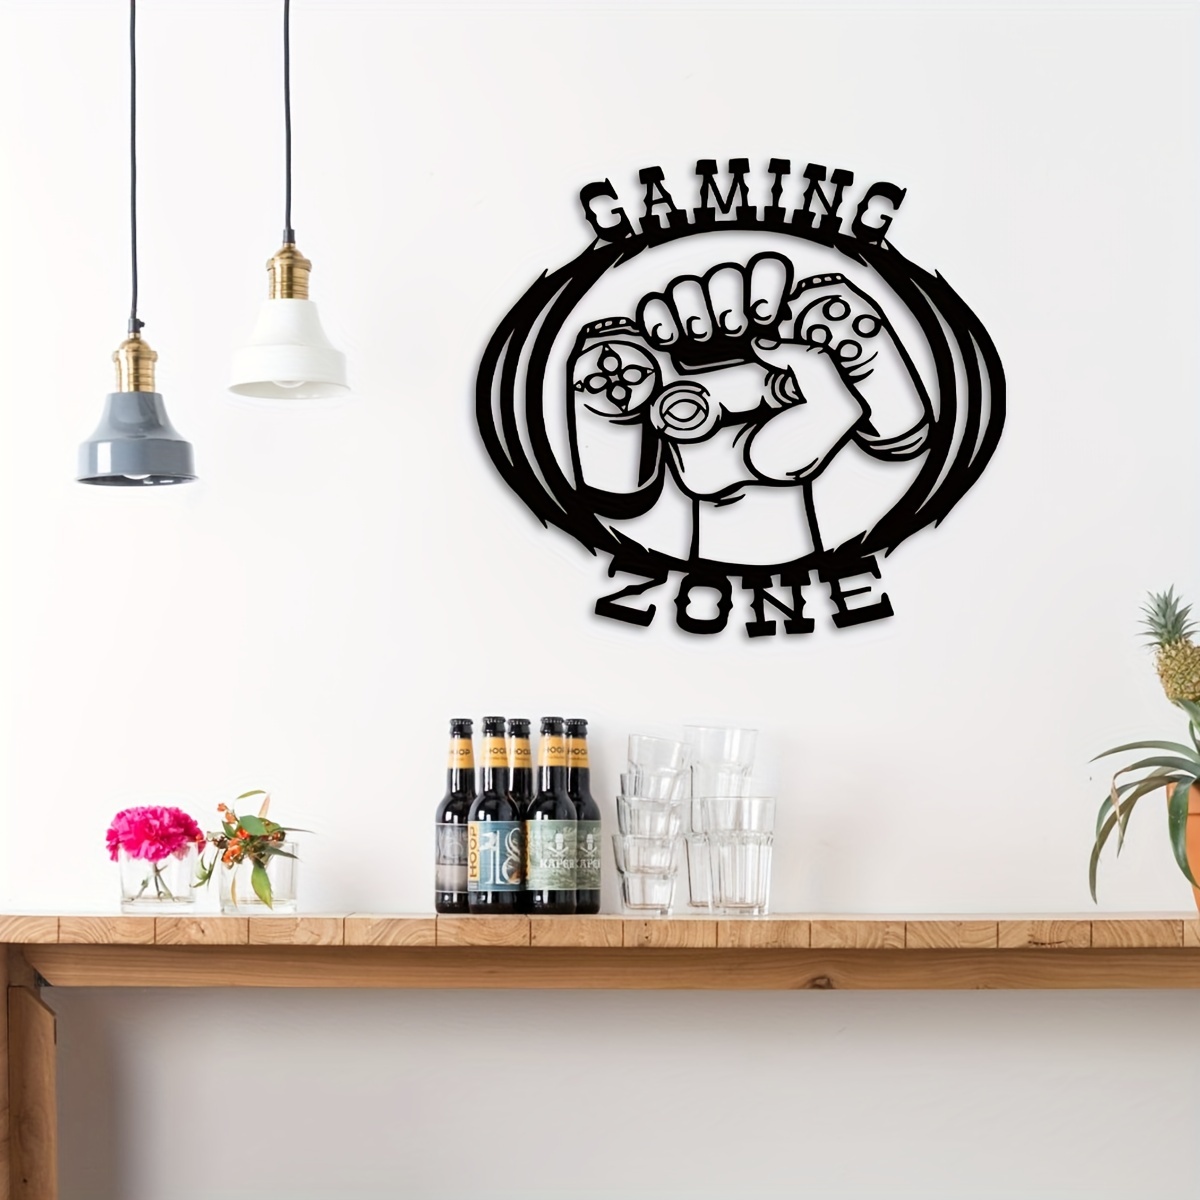 Gamer Wall Sticker - Gaming Zone - Gamer with Controller Wall